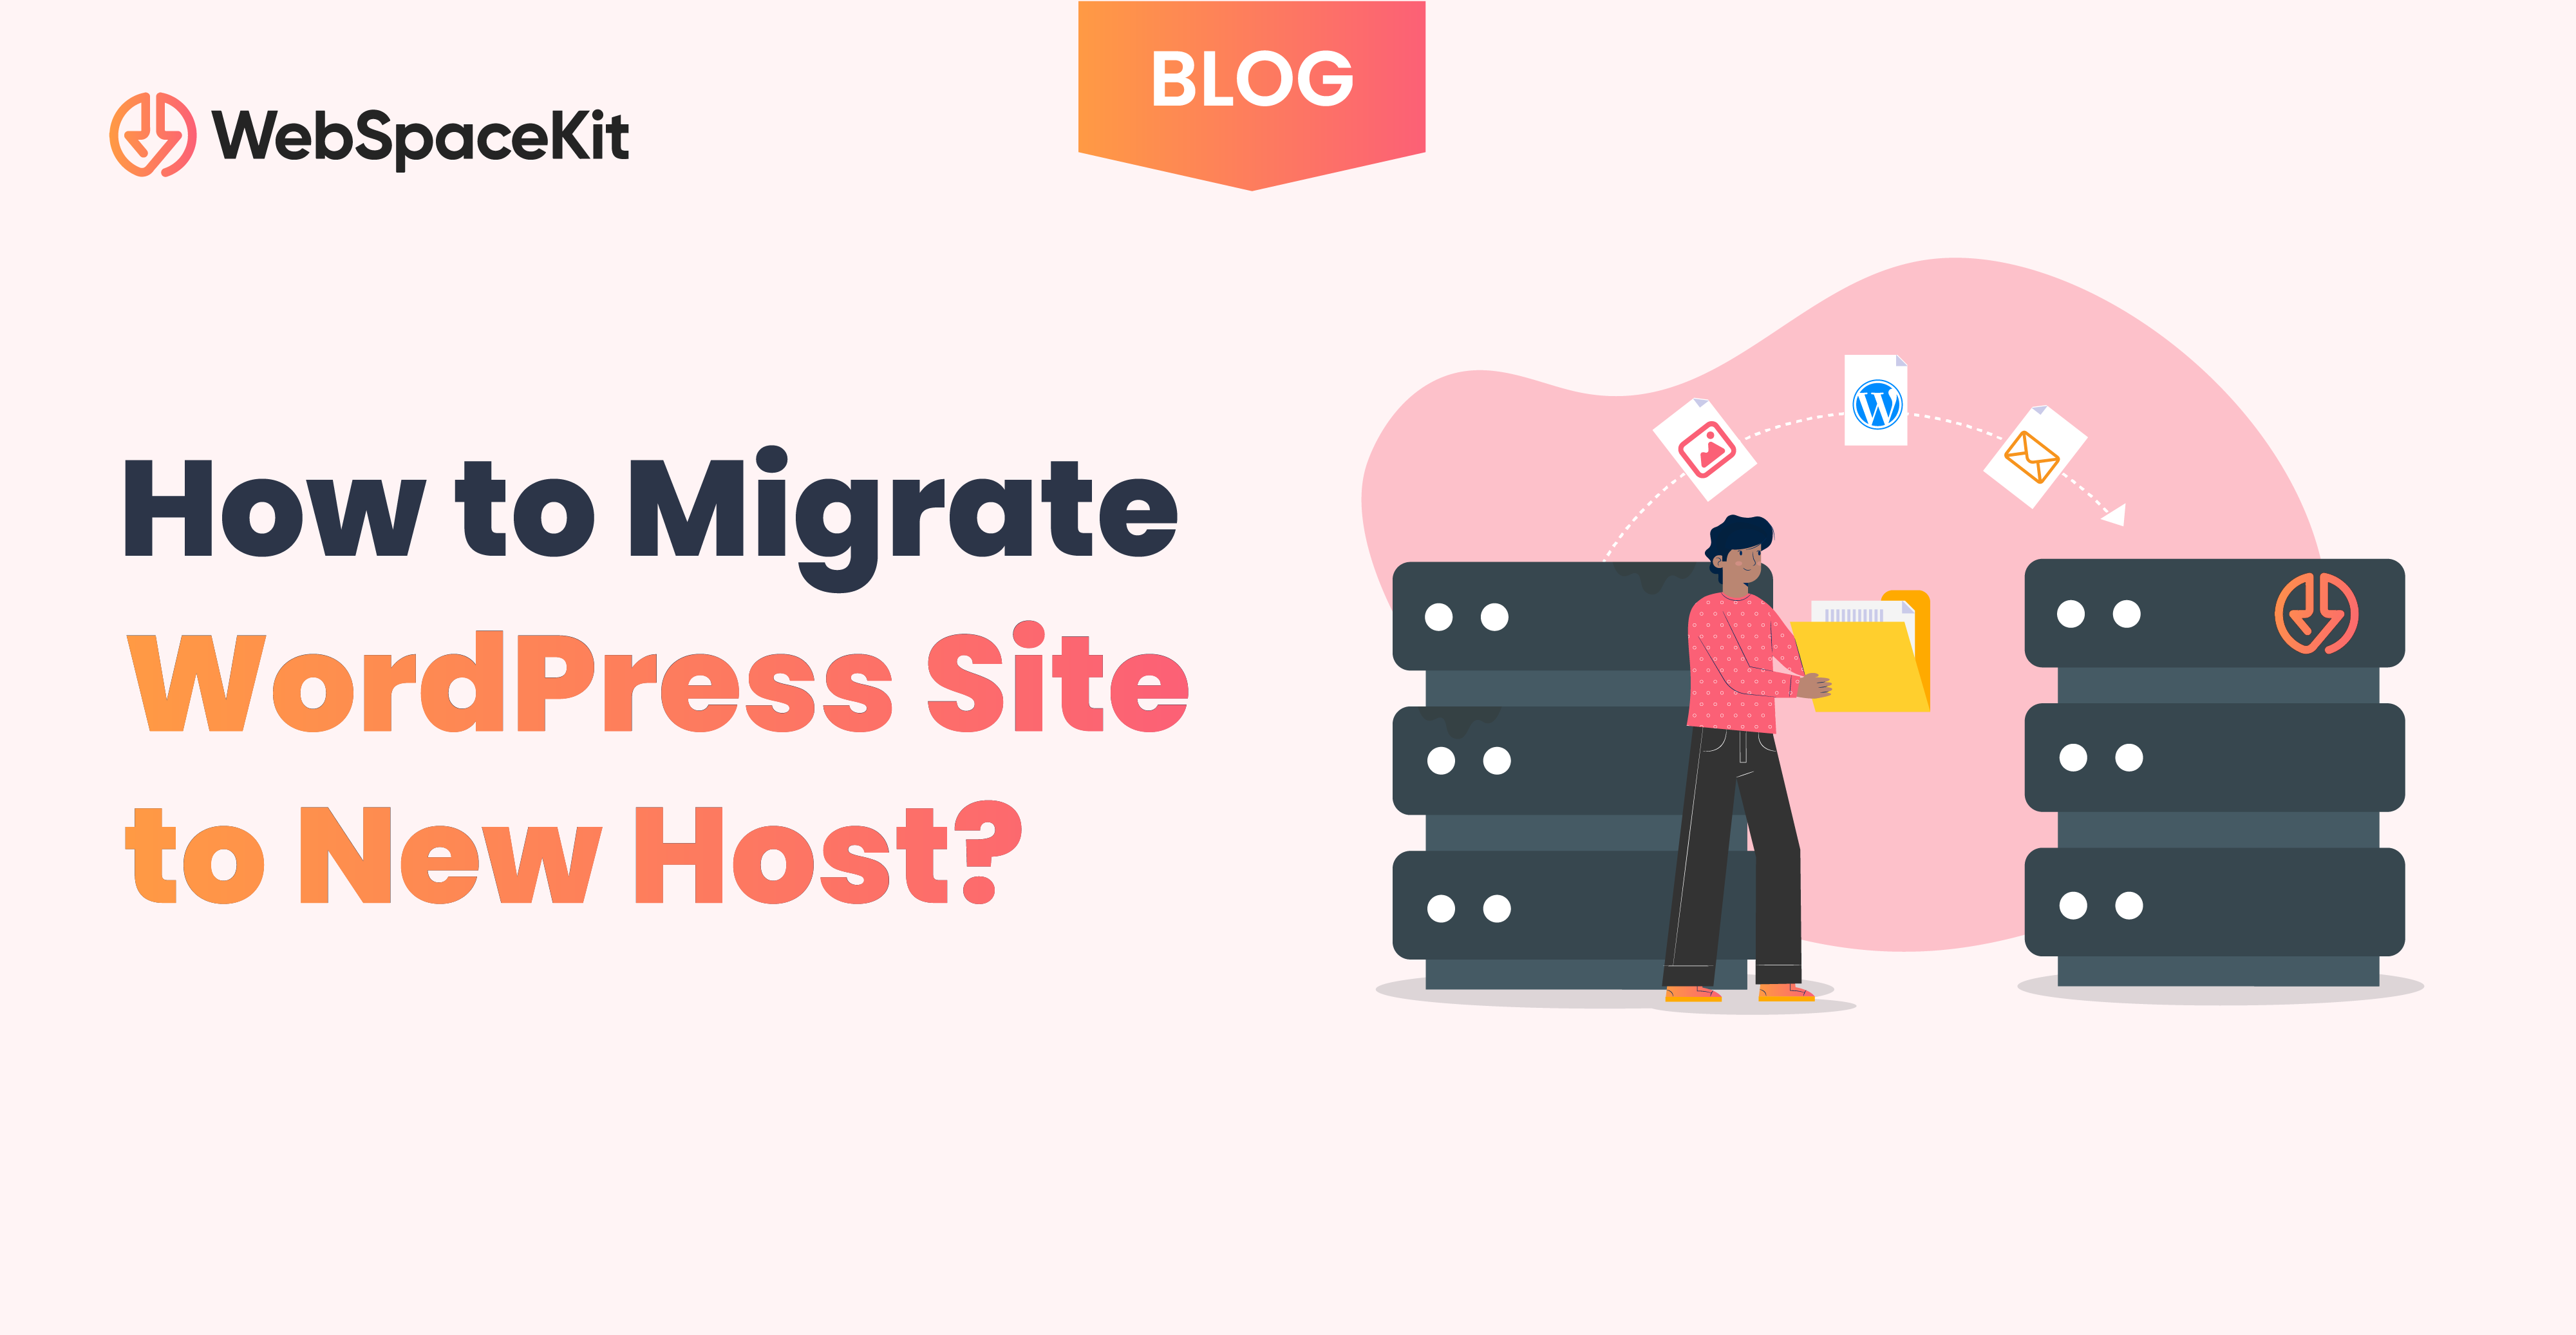 How to Migrate WordPress Site to new Host